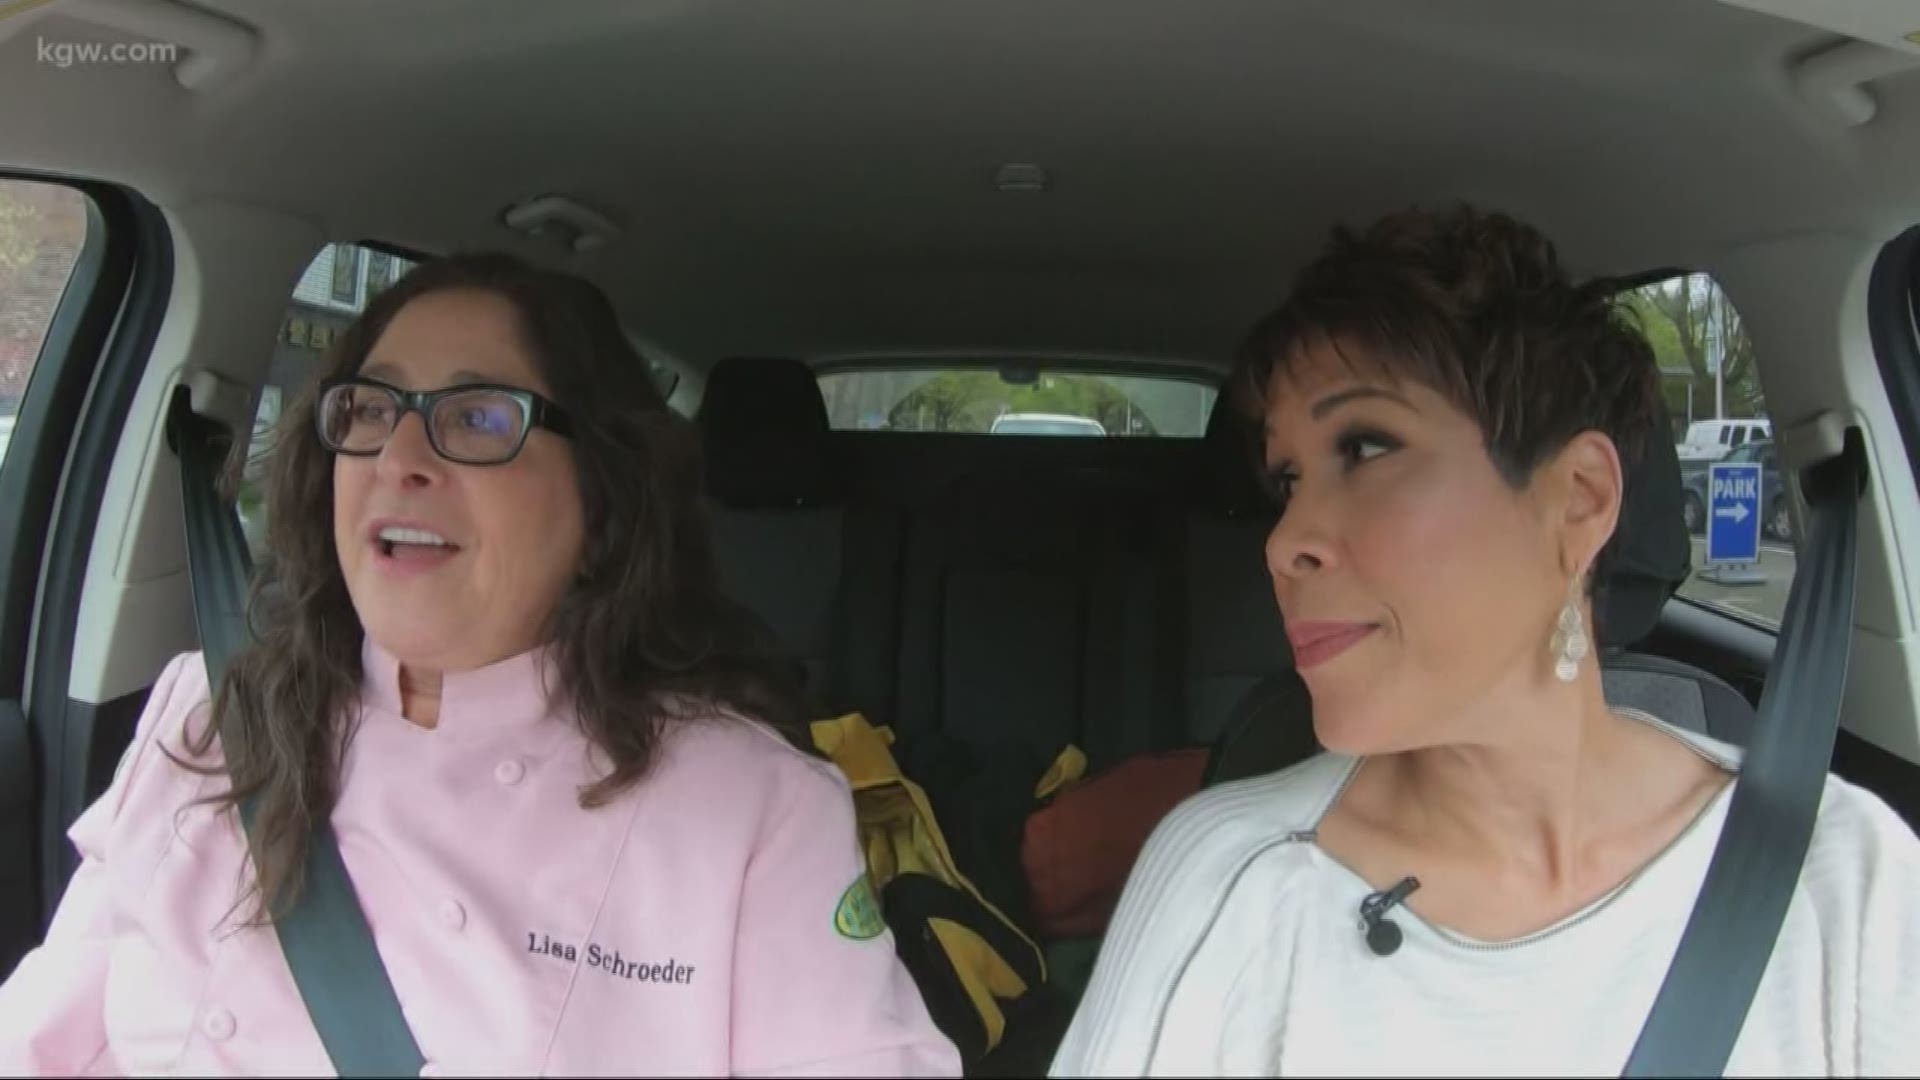 KGW's Brenda Braxton took Lisa Schroeder, the executive chef and owner of Mother's Bistro, on a ride aboard the KGW Carpool! They talked about Lisa's new restaurant space, raising her daughter's twin boys and she revealed a secret about herself you'd never guess!